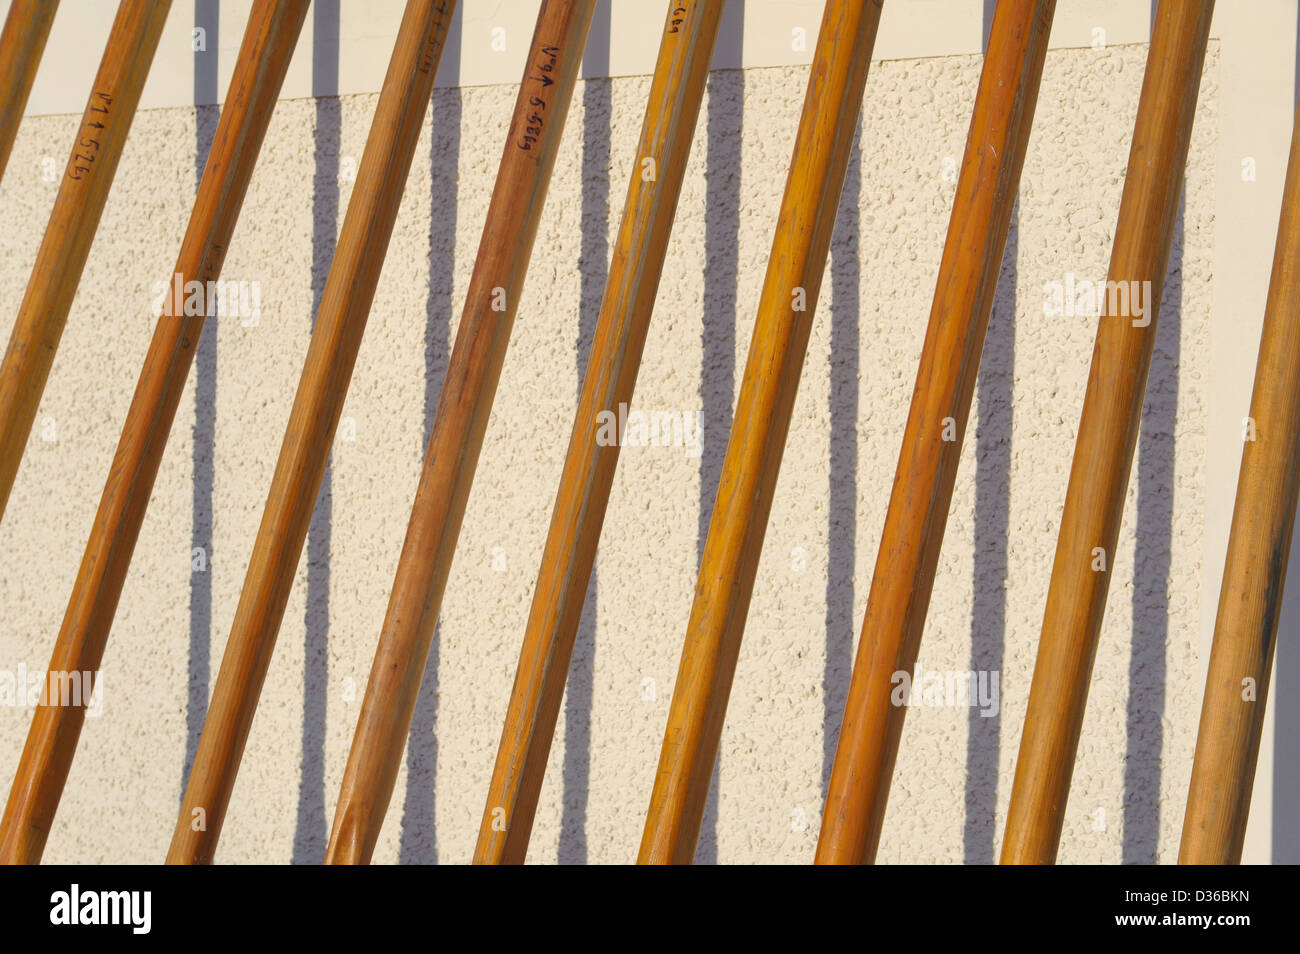 Traditional wooden oars from a racing skiff (rowing boat) drying in the sun, and making a pattern with their shadows. Stock Photo